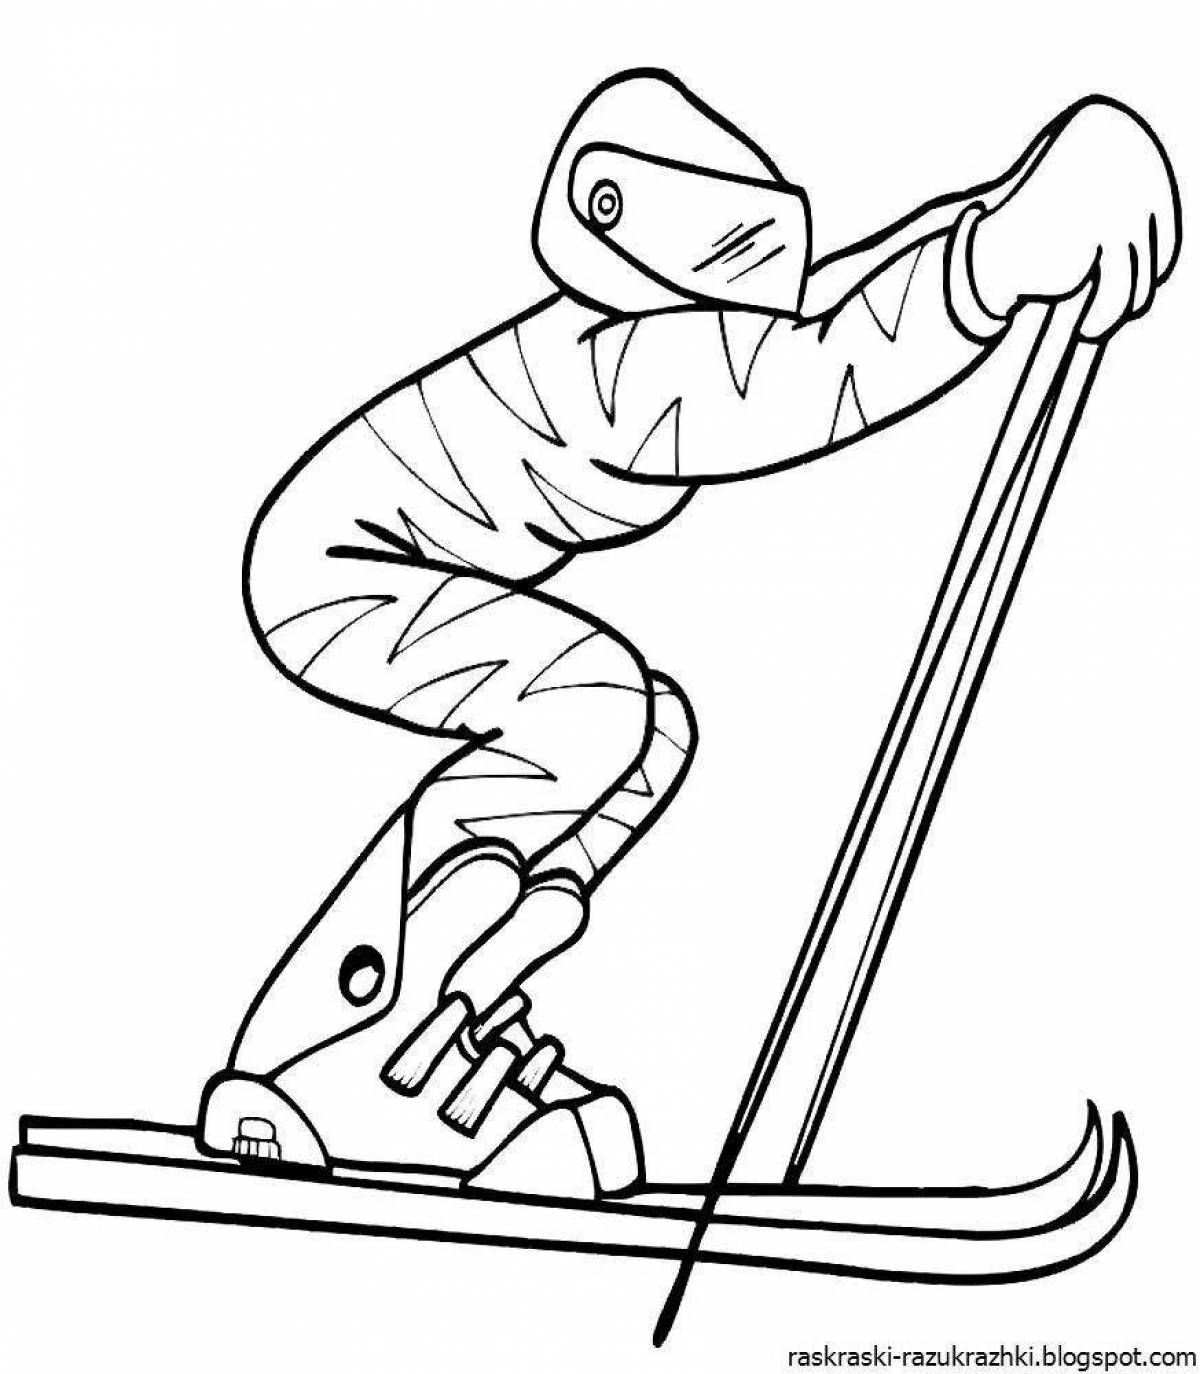 Live coloring for kids winter sports